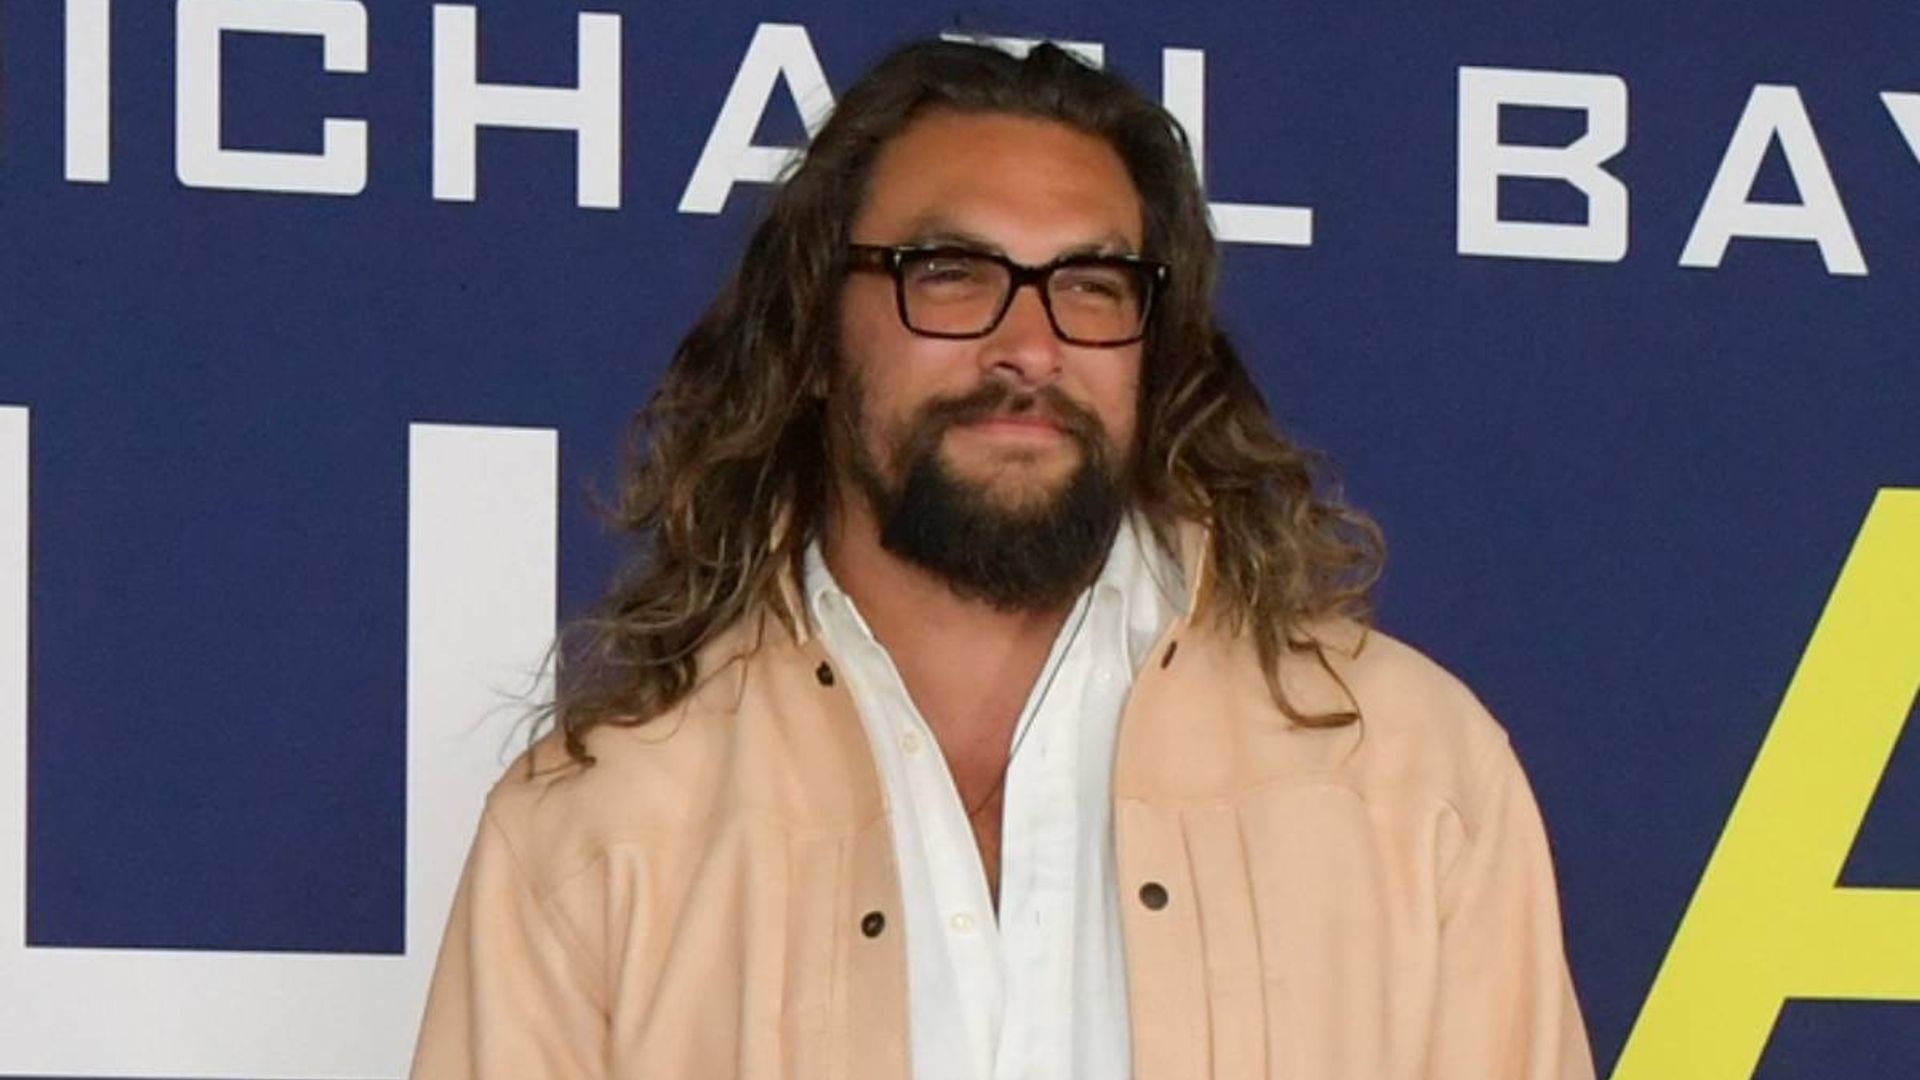 Jason Momoa reveals actress he is dating - and it's not Kate Beckinsale